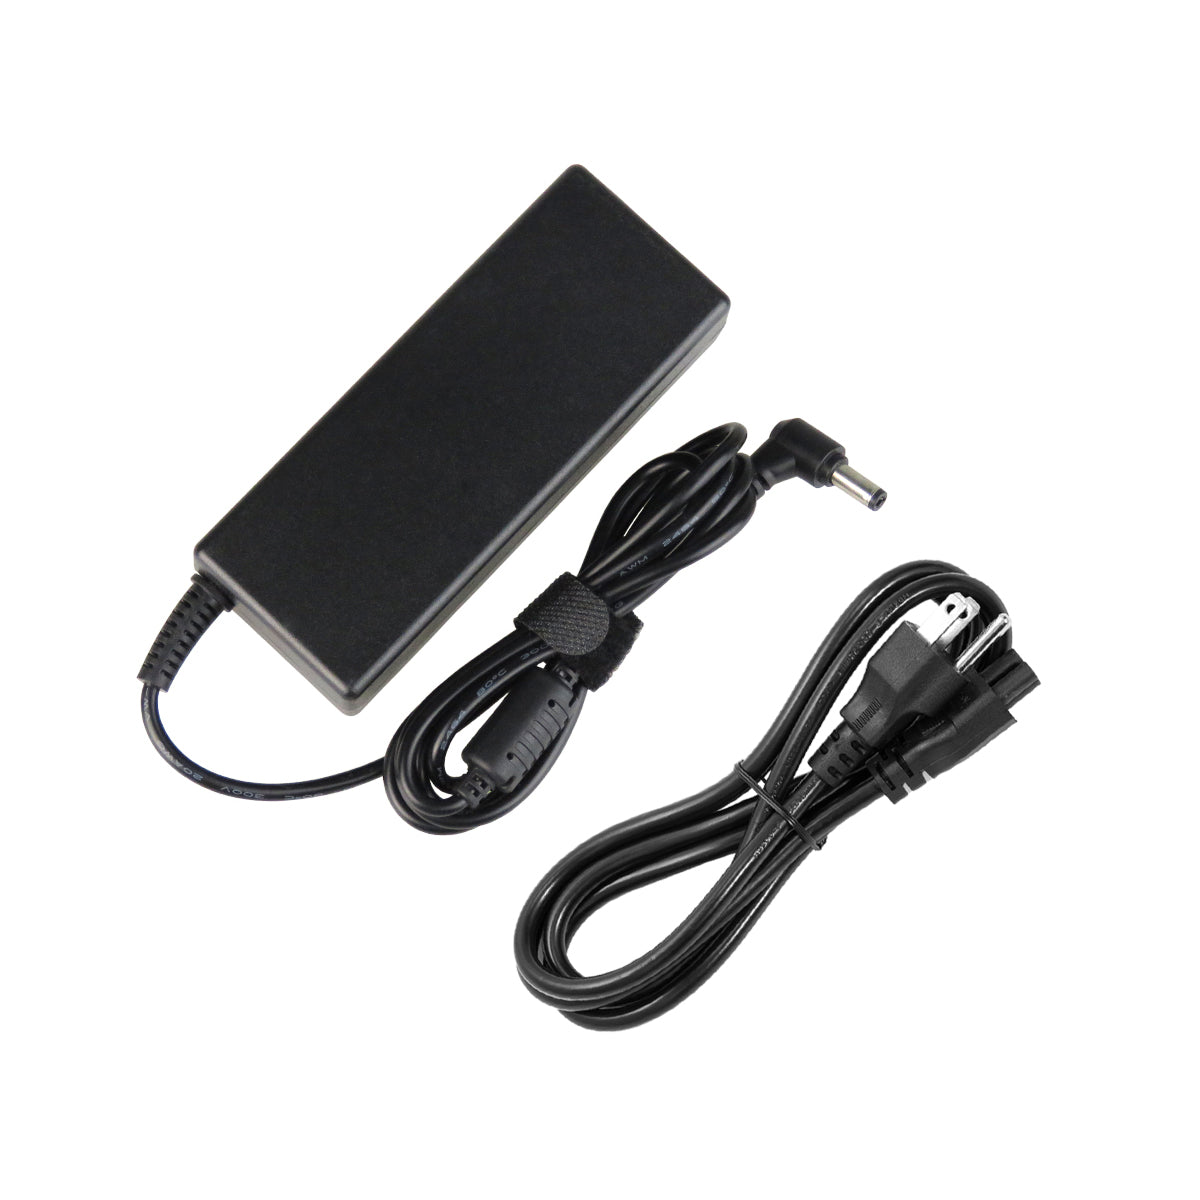 AC Adapter Charger for ASUS N61JA Notebook.